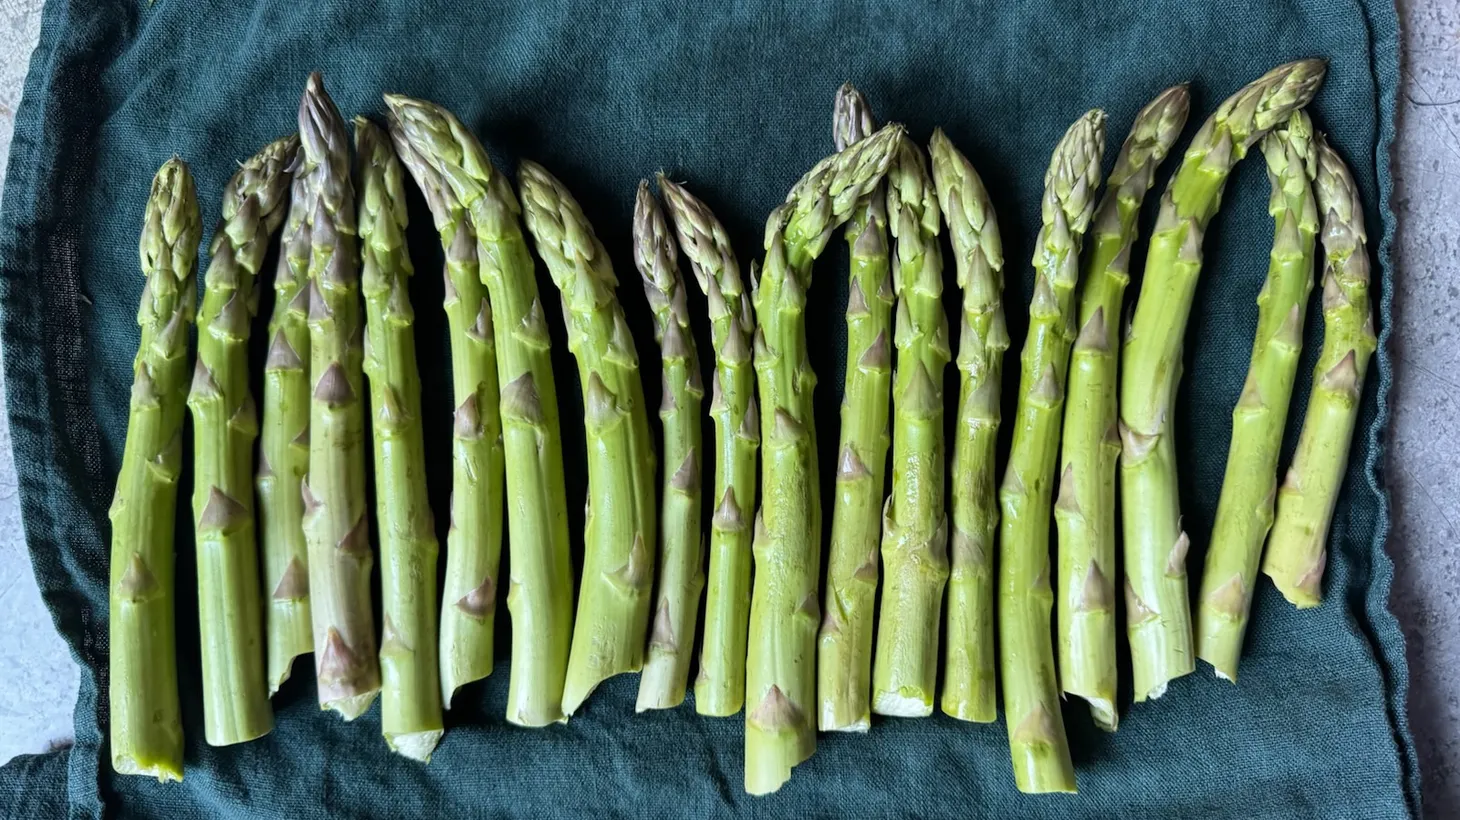 Zuckerman Family Farms grows asparagus revered by chefs but limited supply puts a halt to its farmer's market appearances.